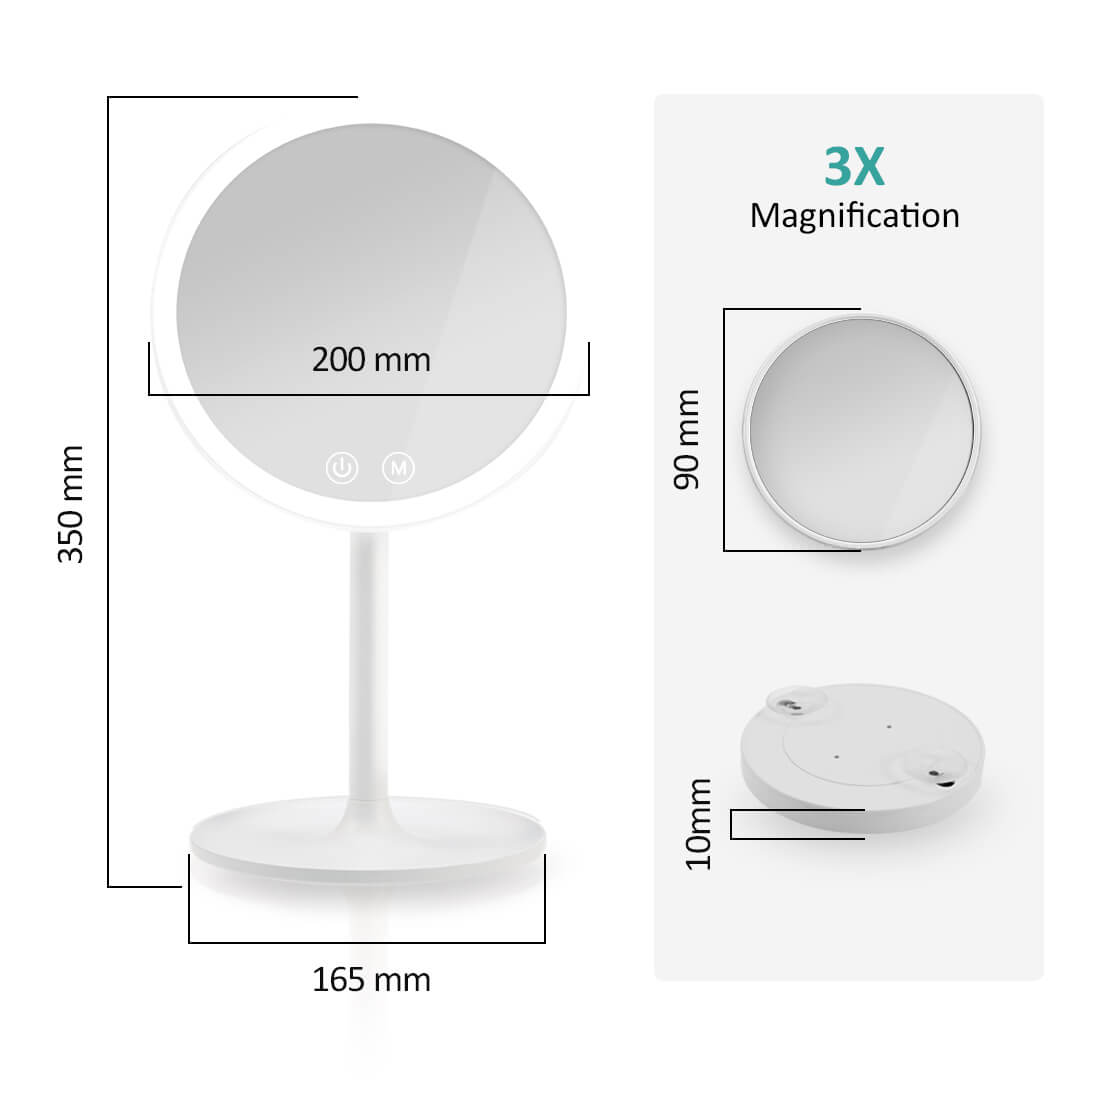 emke led cosmetic mirror 3x magnification